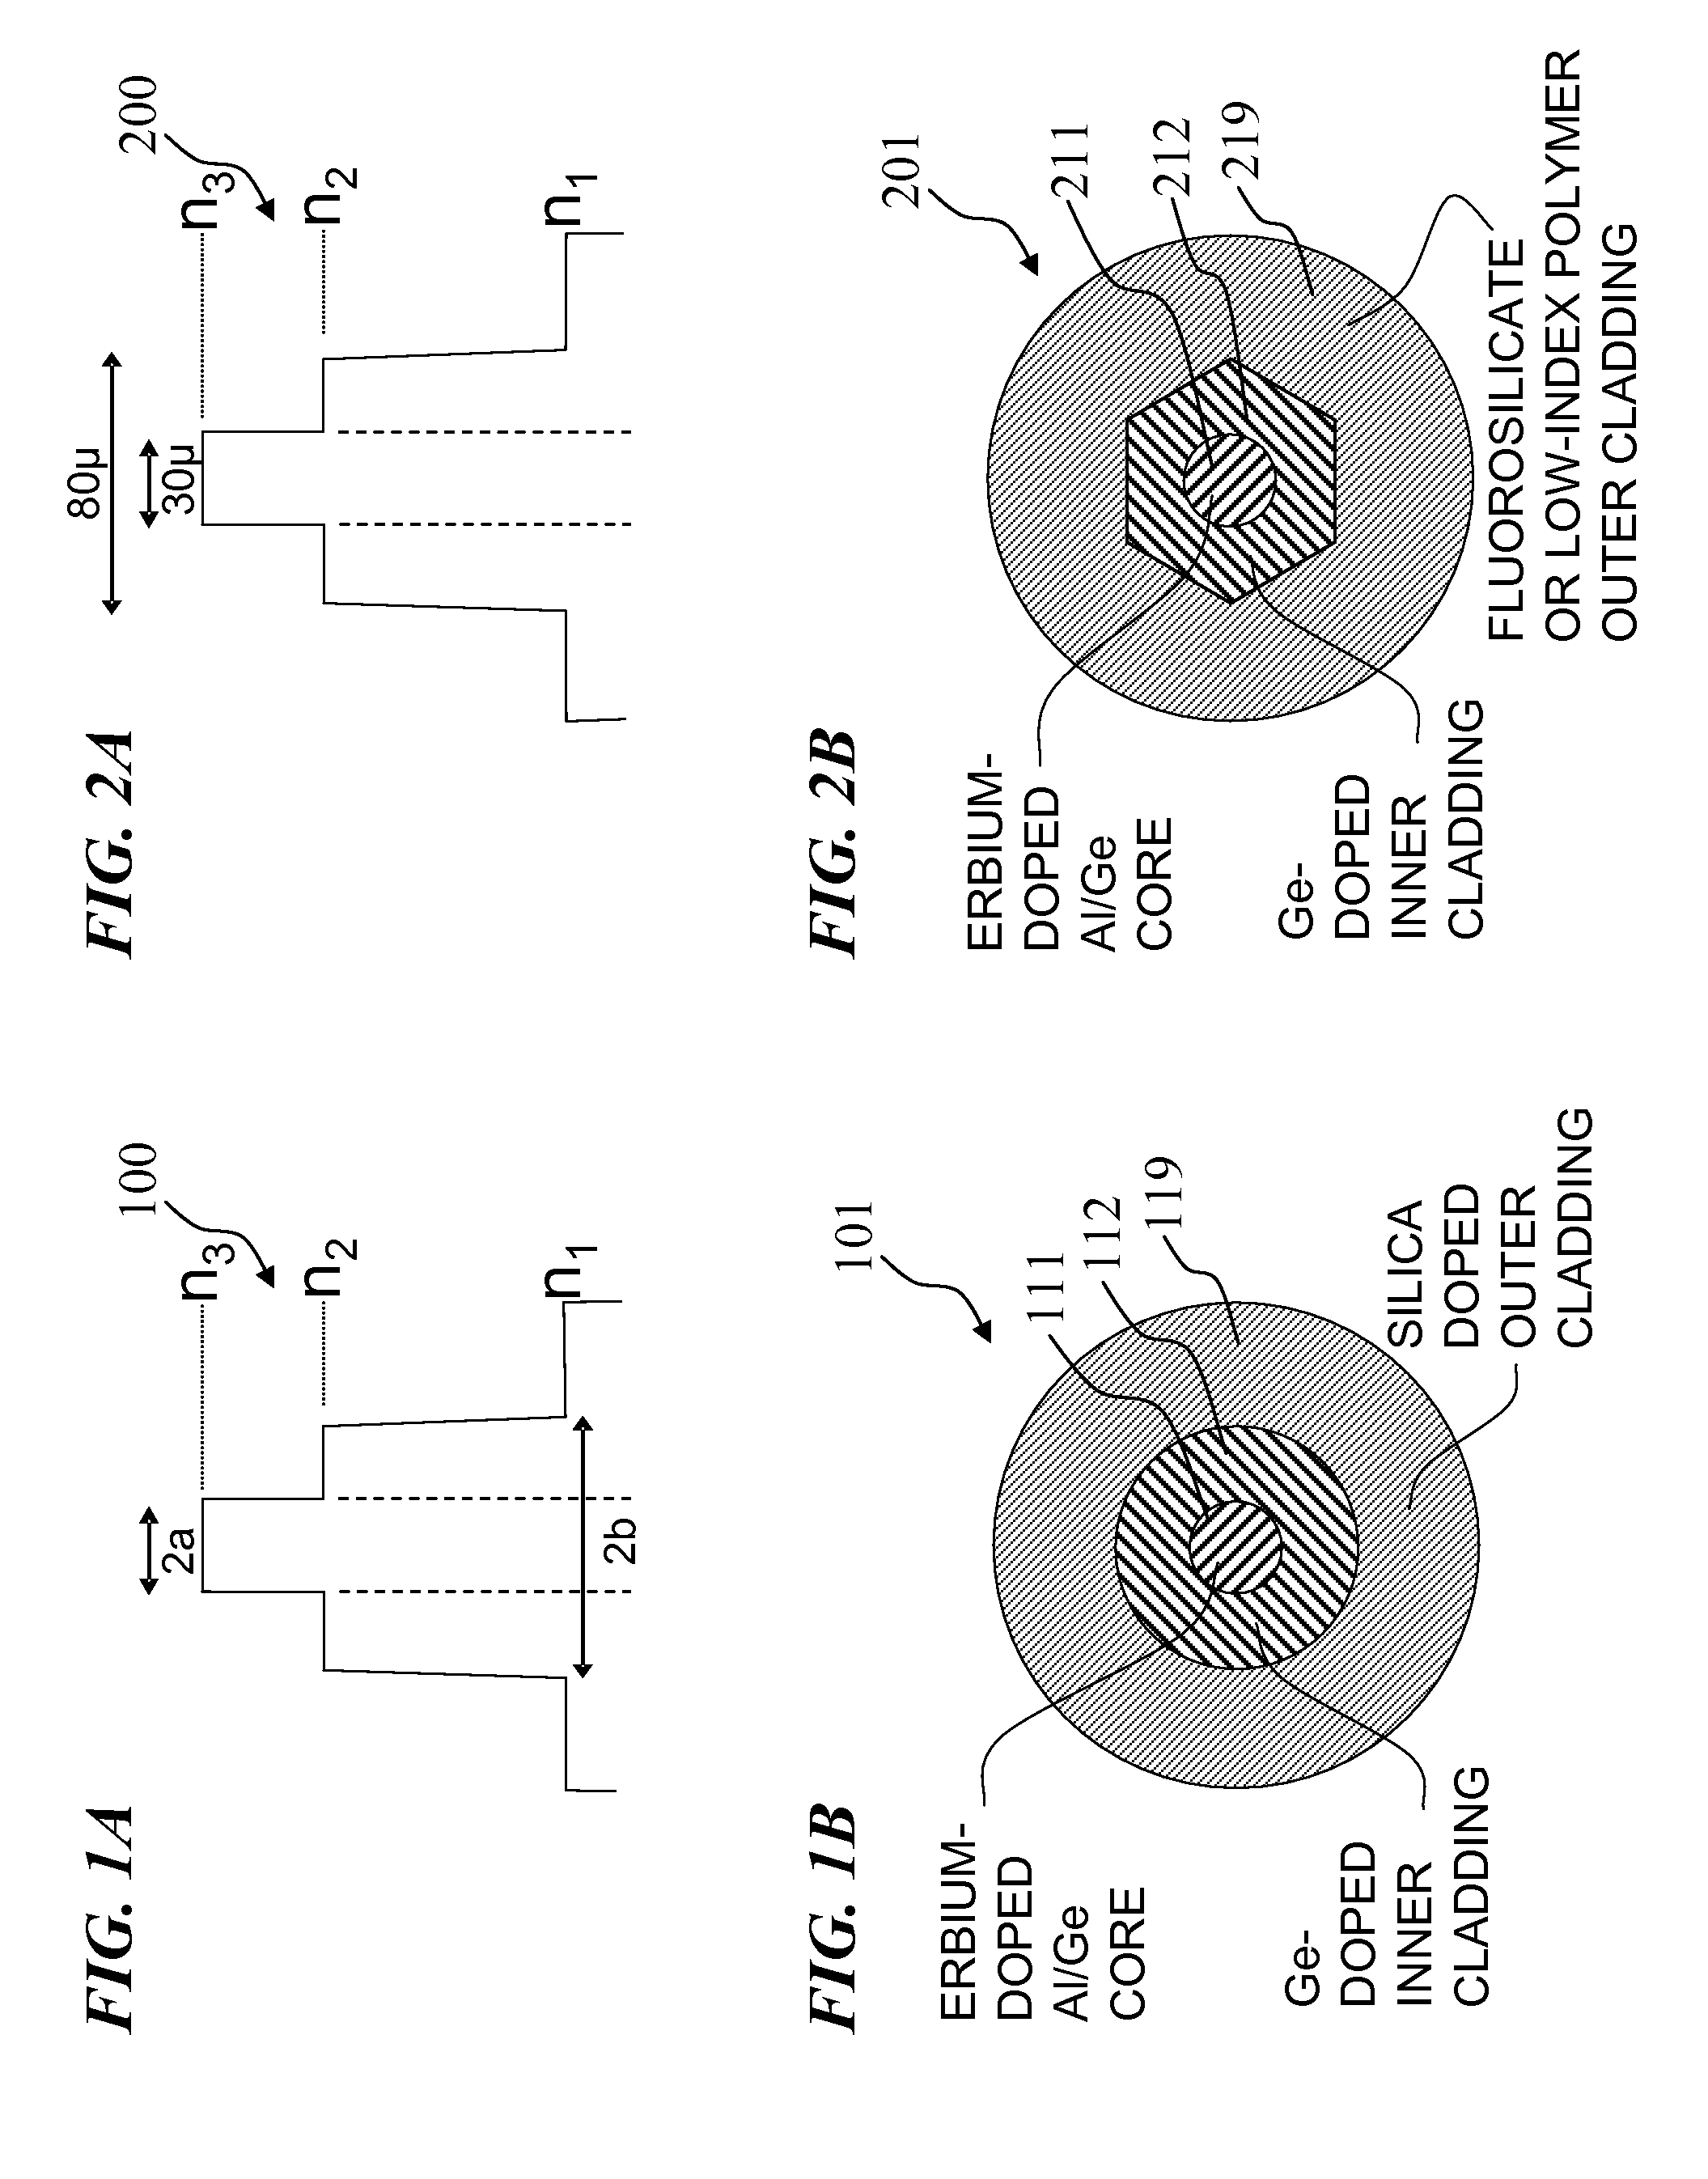 Apparatus and method for an erbium-doped fiber for high peak-power applications